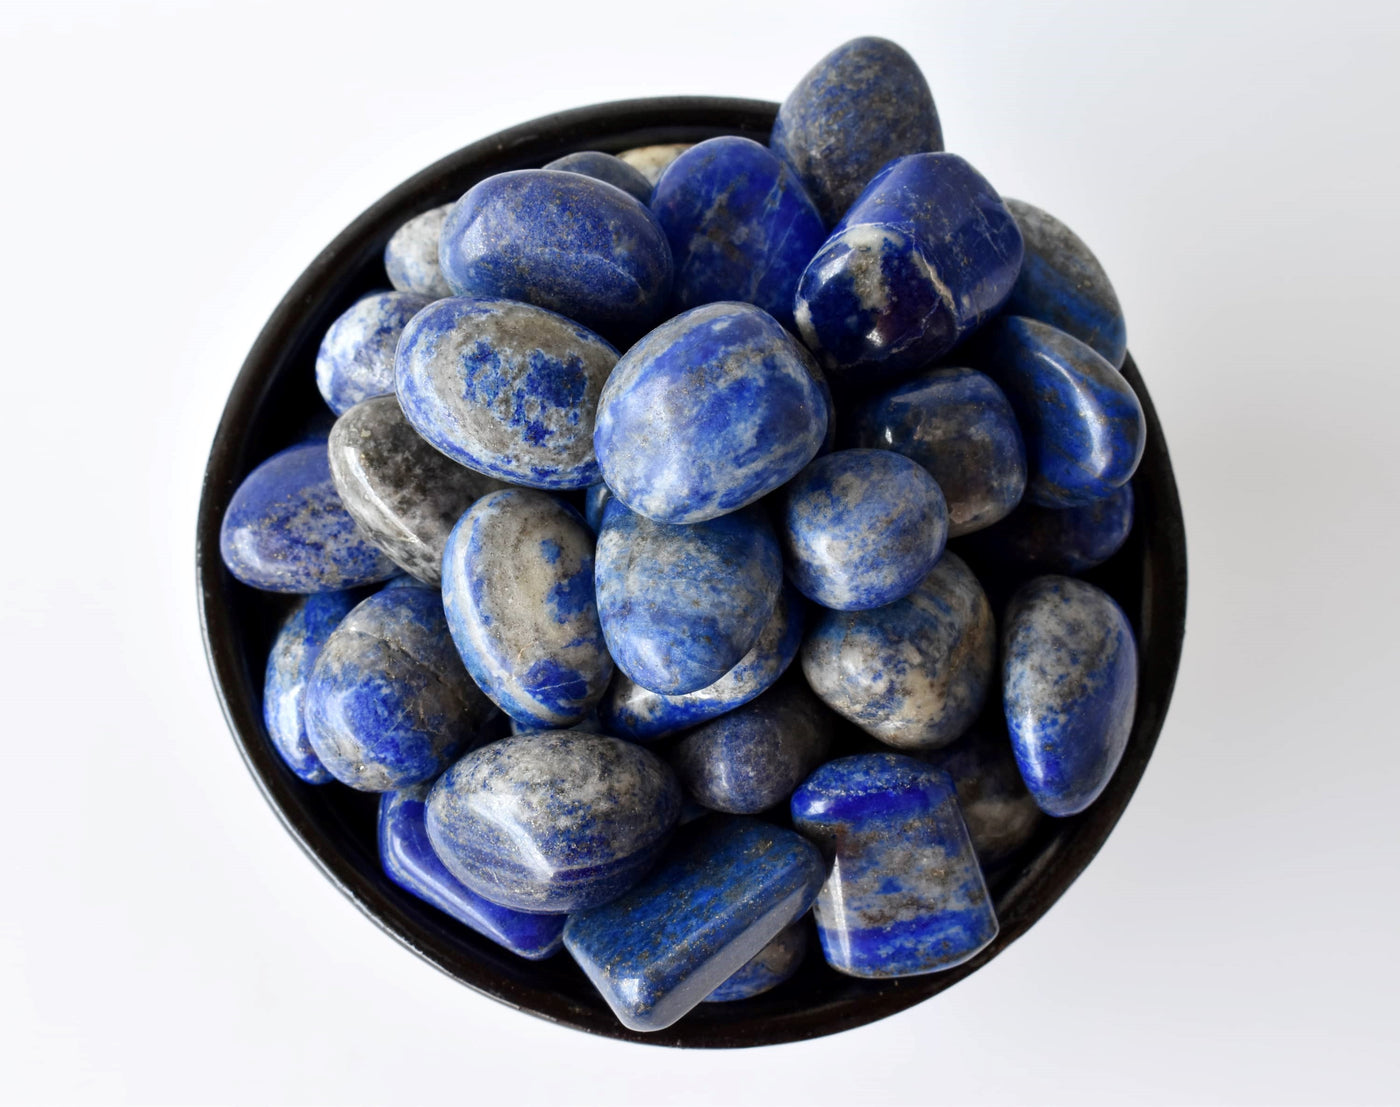 Lapis Lazuli Tumbled Crystals (Expansion and Insight)